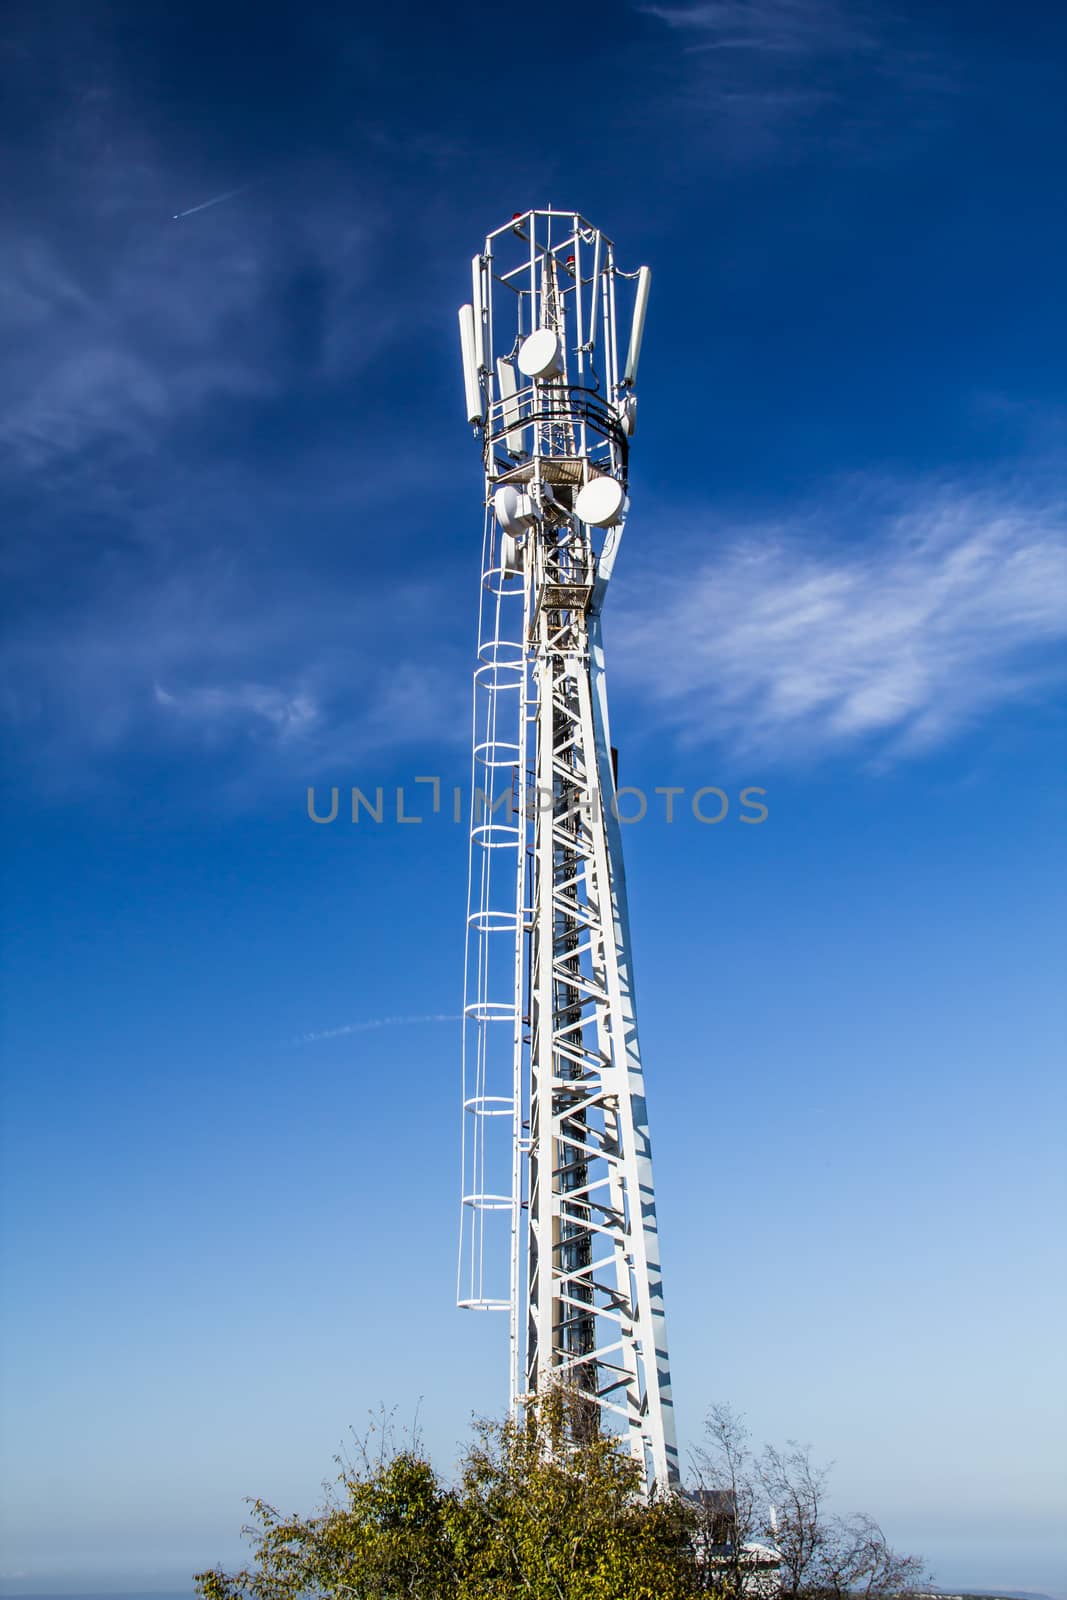 Mast is to accommodate cellular antennas on blue sky background